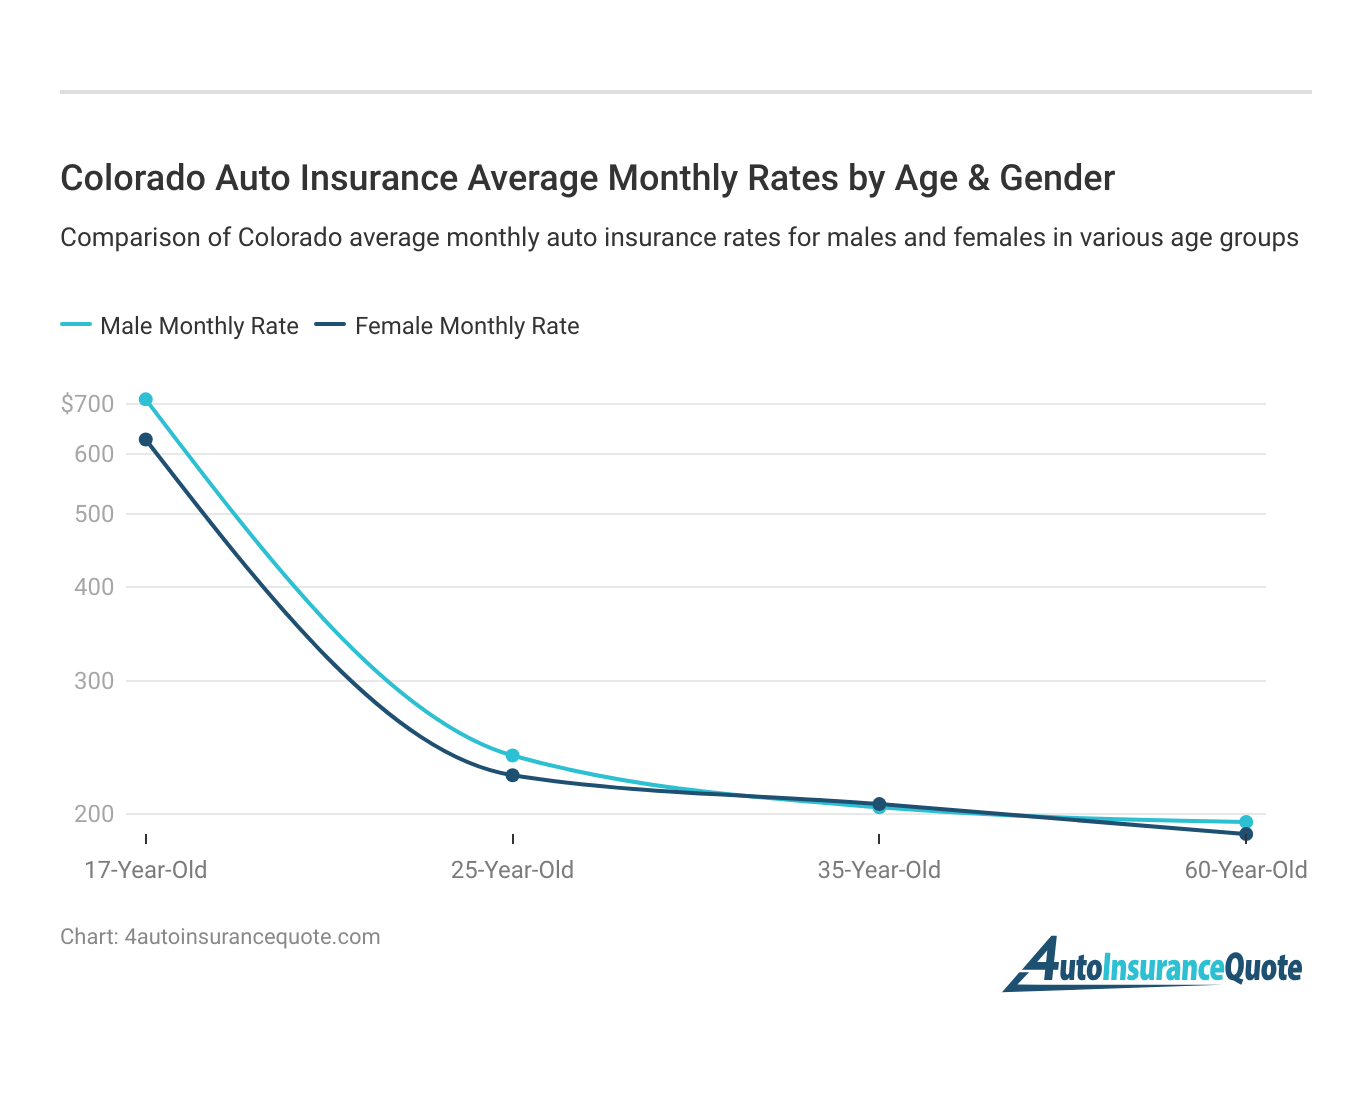 <h3>Colorado Auto Insurance Average Monthly Rates by Age & Gender</h3>